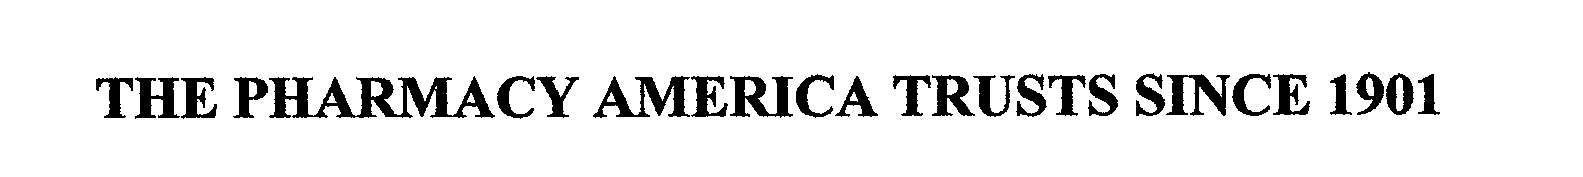  THE PHARMACY AMERICA TRUSTS SINCE 1901